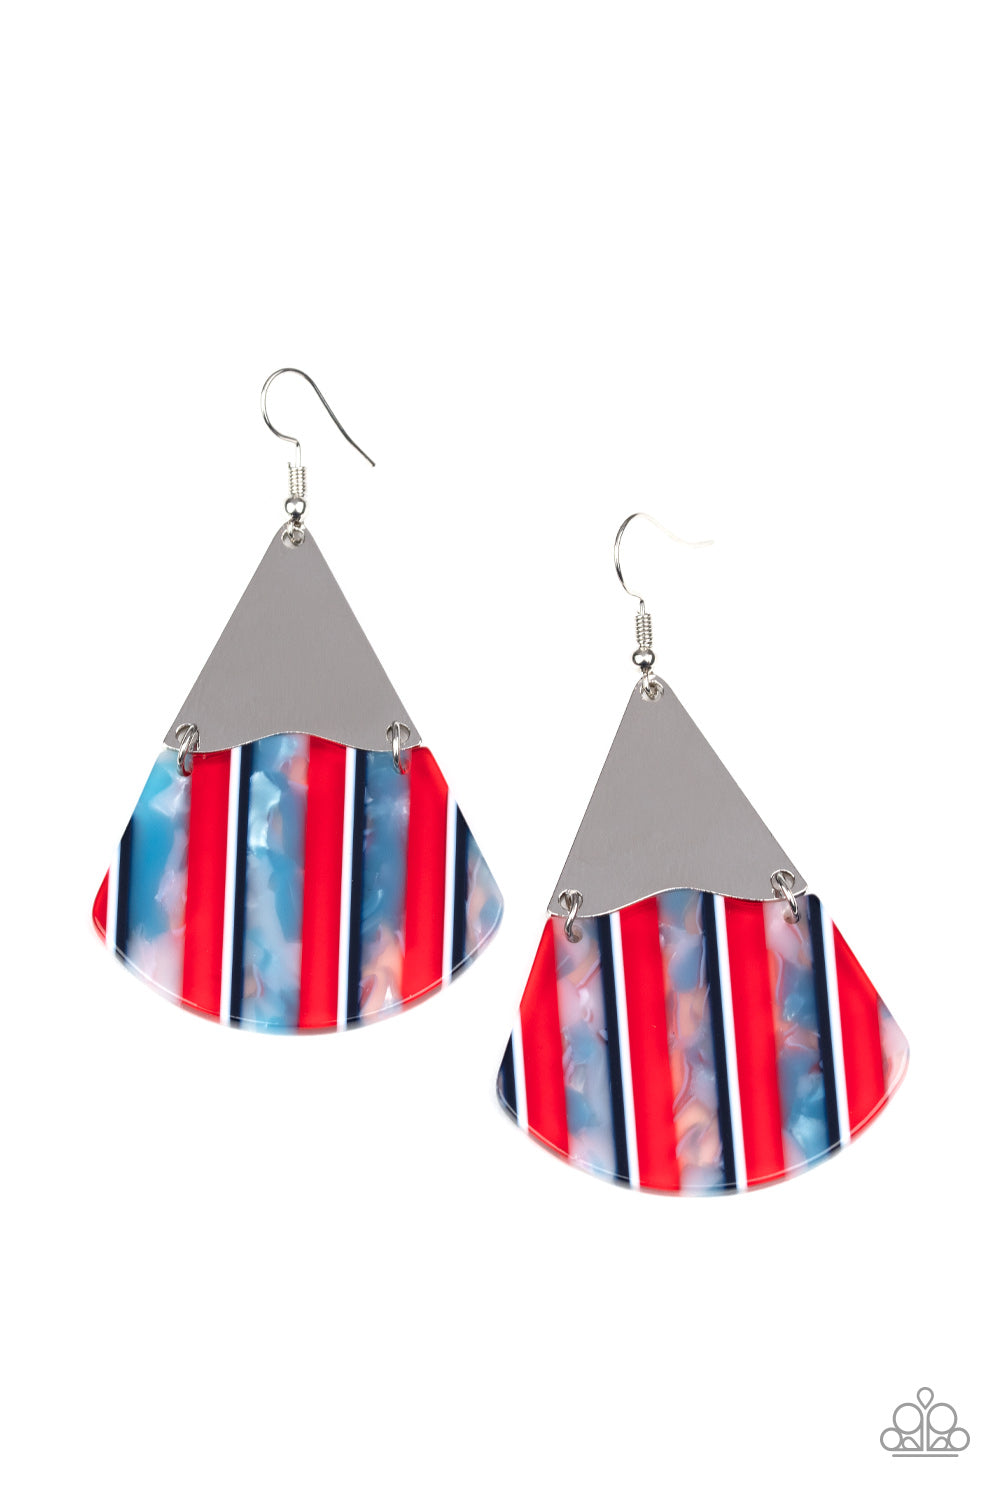 SOCIAL ANIMAL - RED BLUE WHITE MOTHER OF PEARL SILVER TEARDROP ACRYLIC EARRINGS